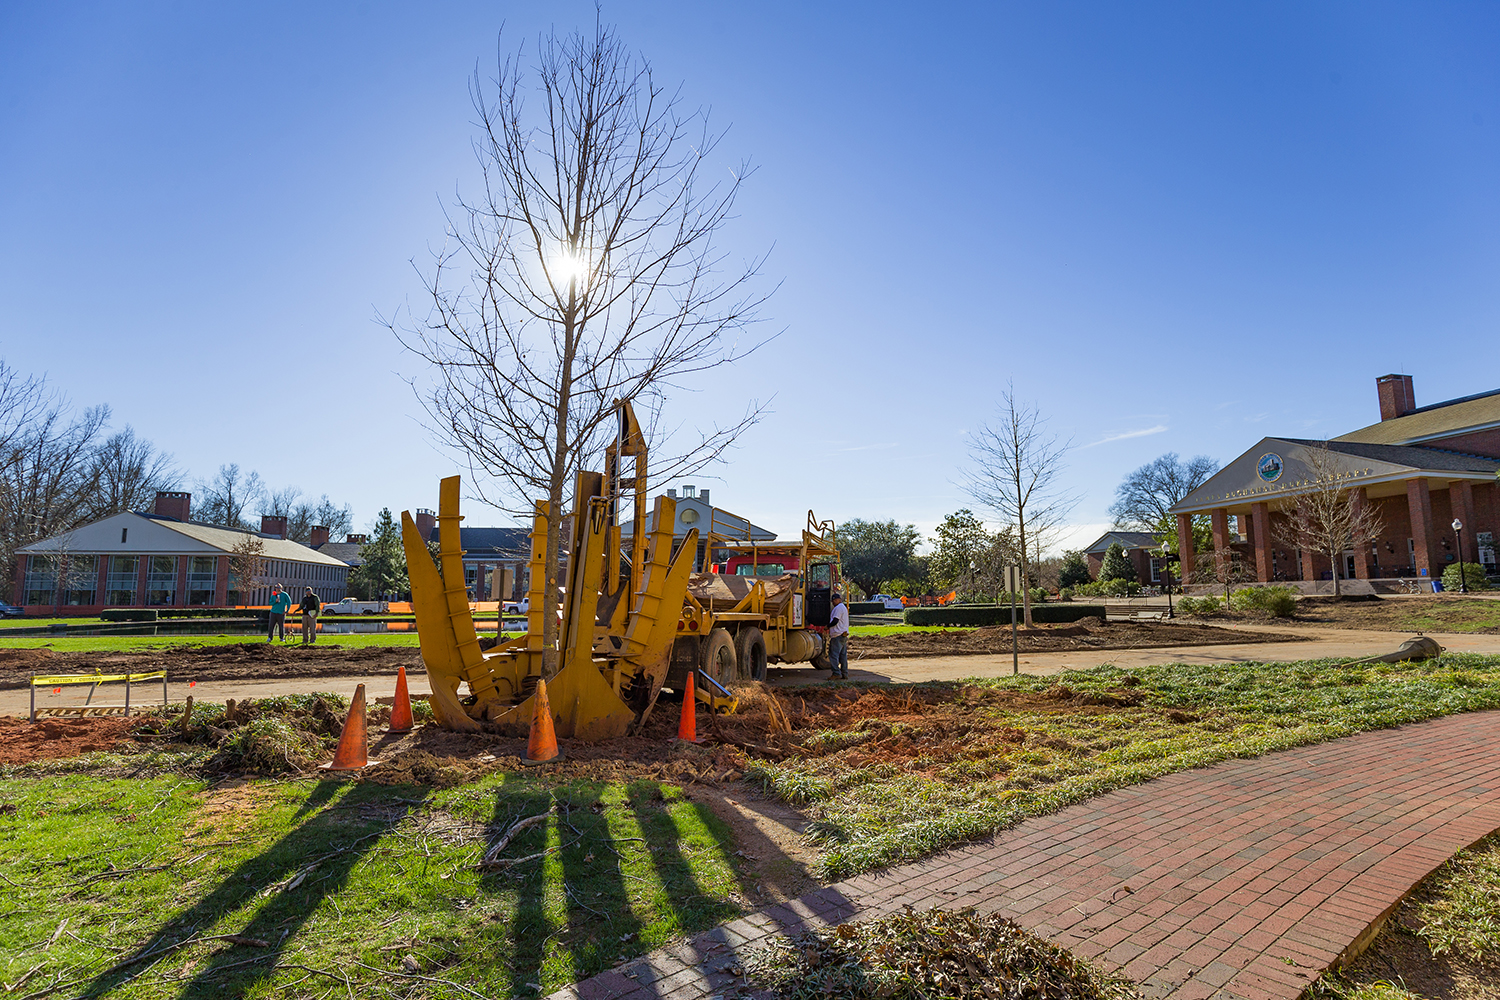 A large tree spade, a planting device like a backhoe, plants a young tree on a sunny day.